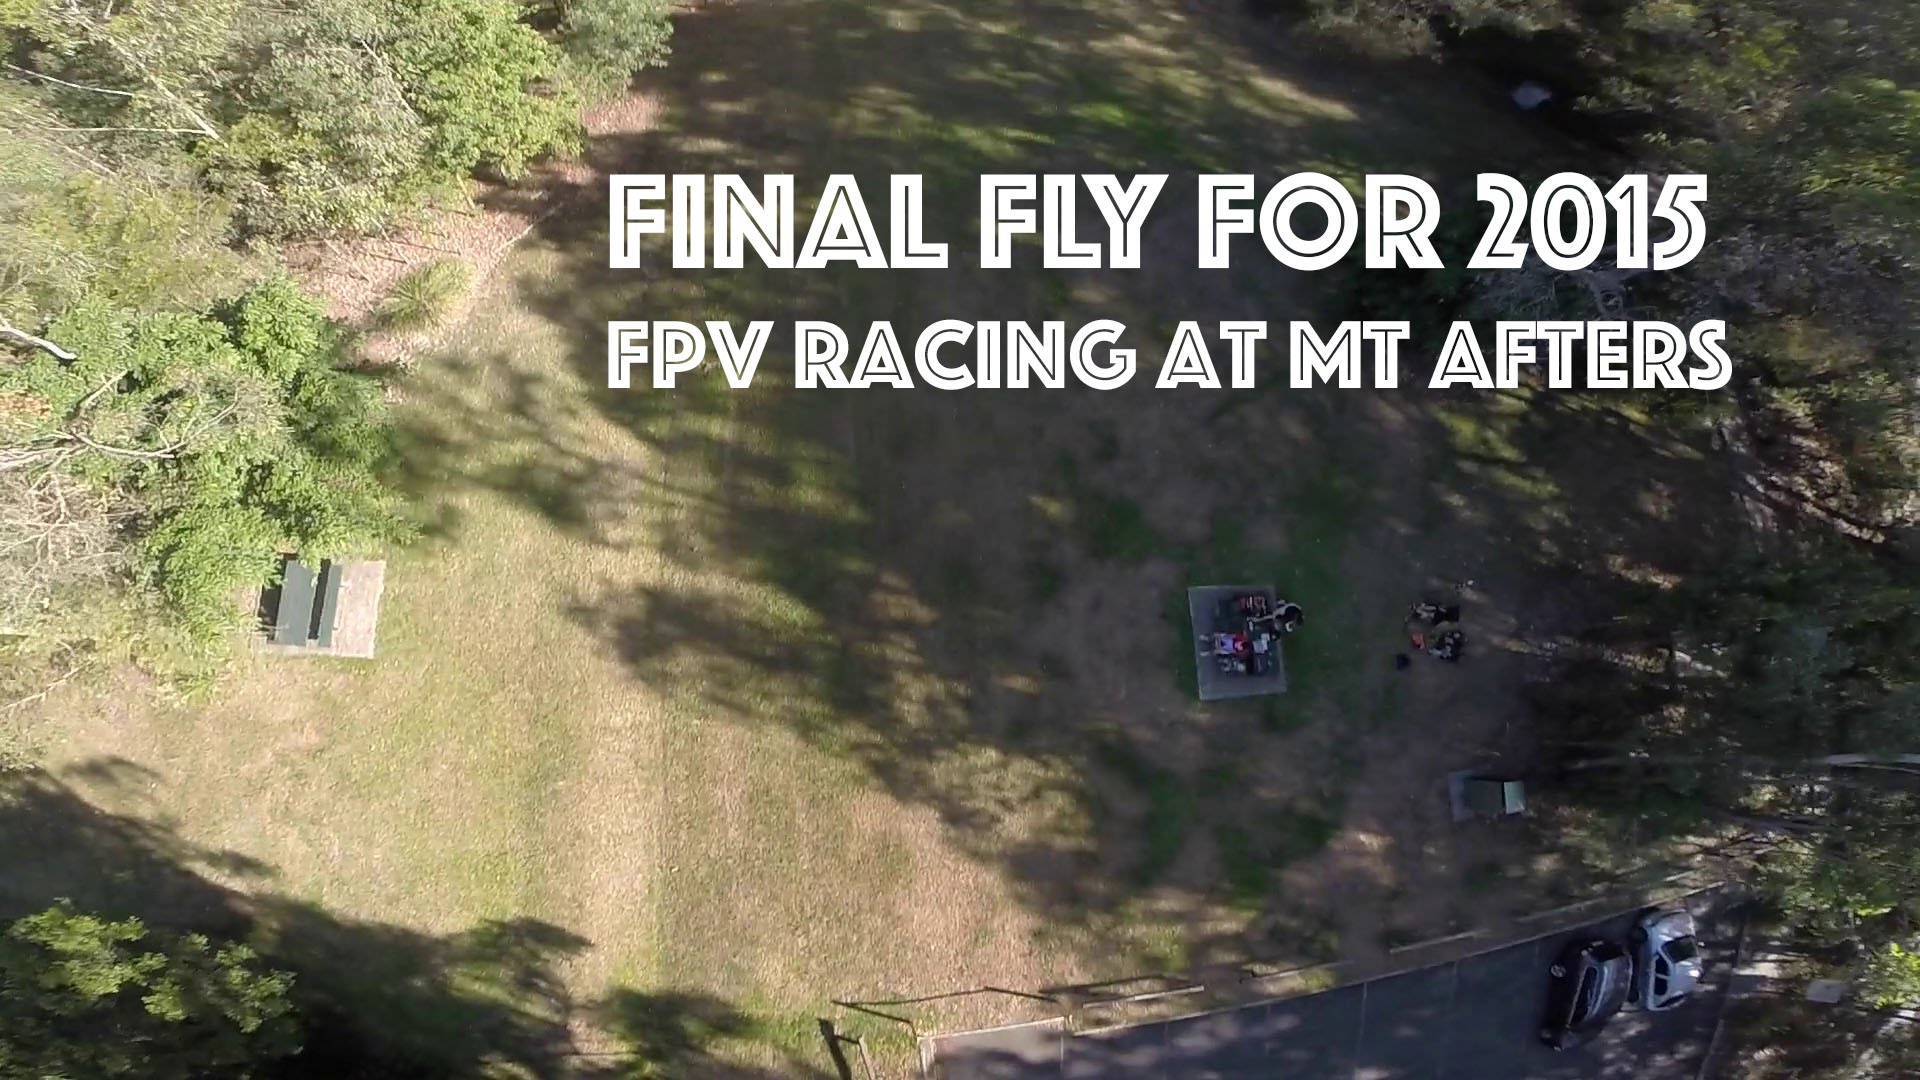 Final Fly 2015 – FPV Racing at Mount Afters